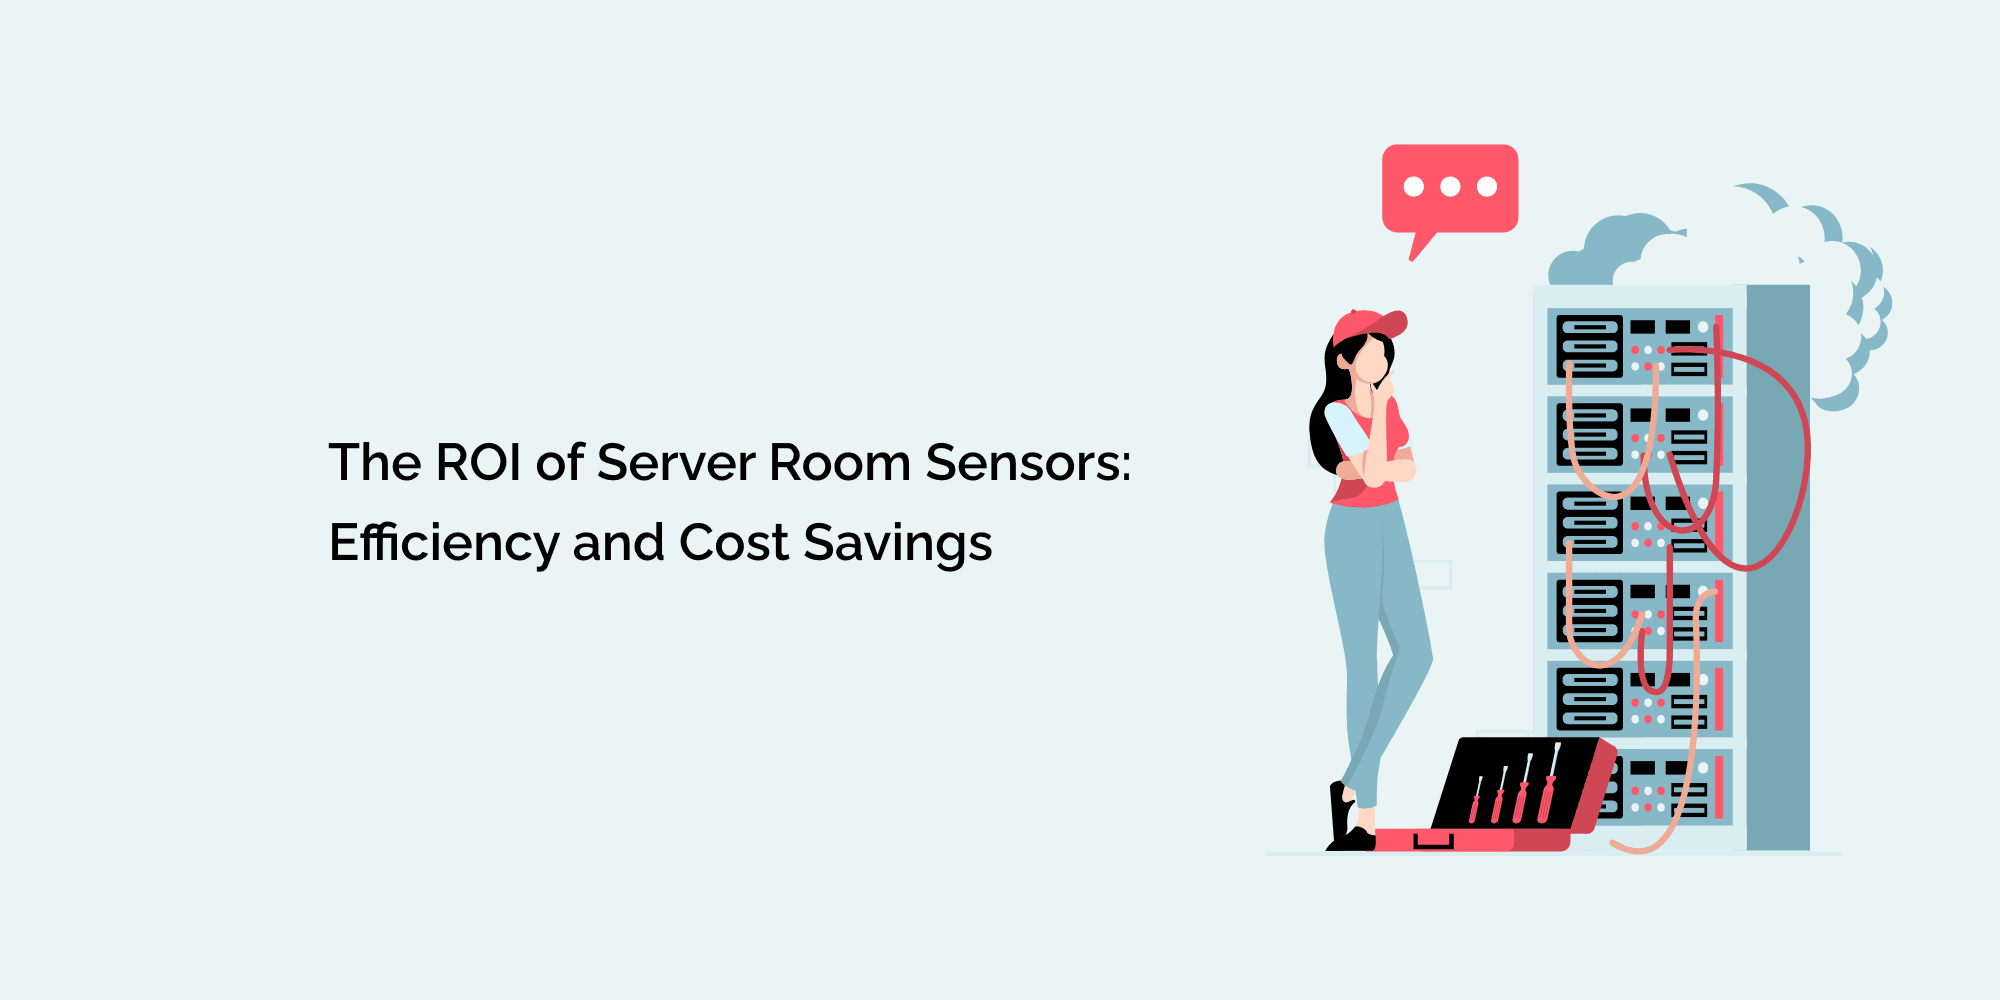 The ROI of Server Room Sensors: Efficiency and Cost Savings